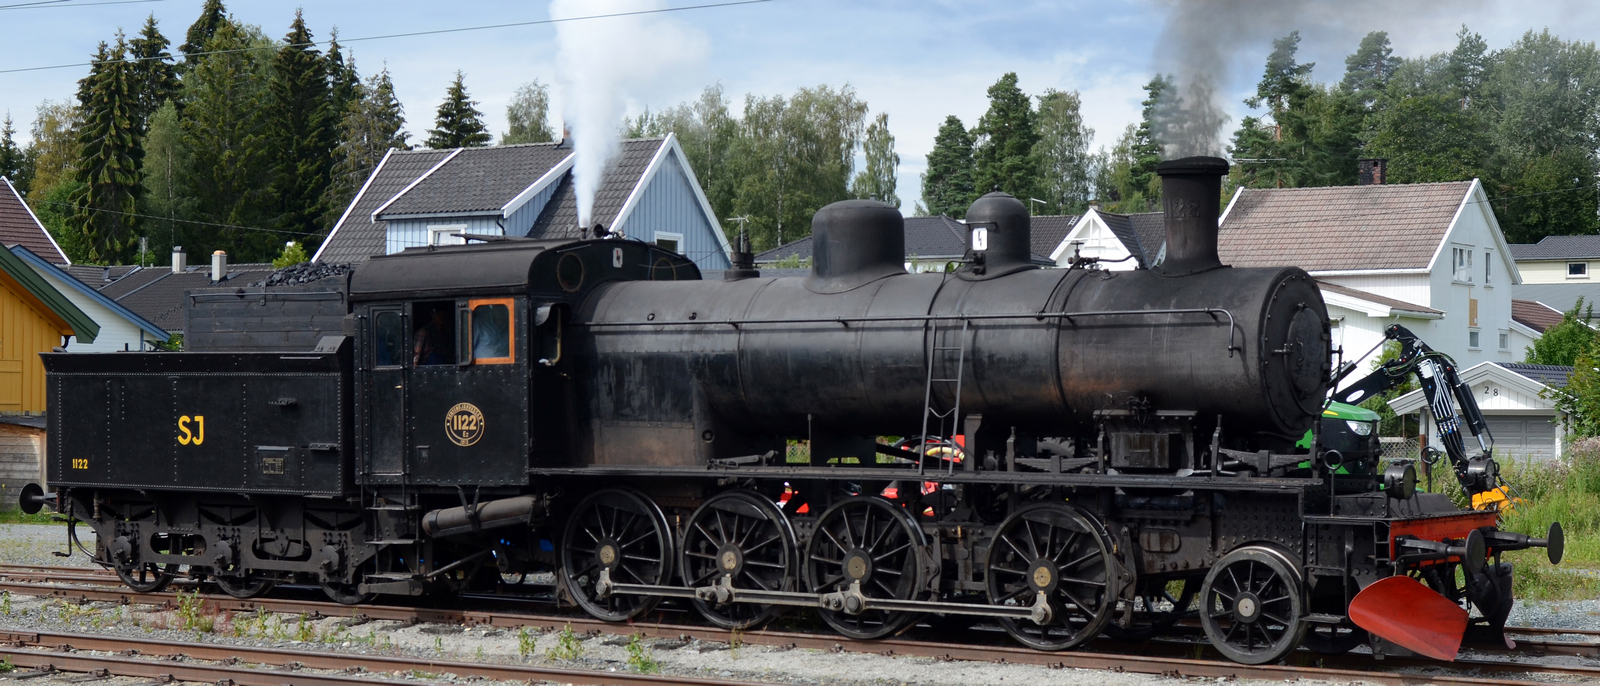 E<sup>II</sup> No. 1122 in August 2015 on the Krøderbanen